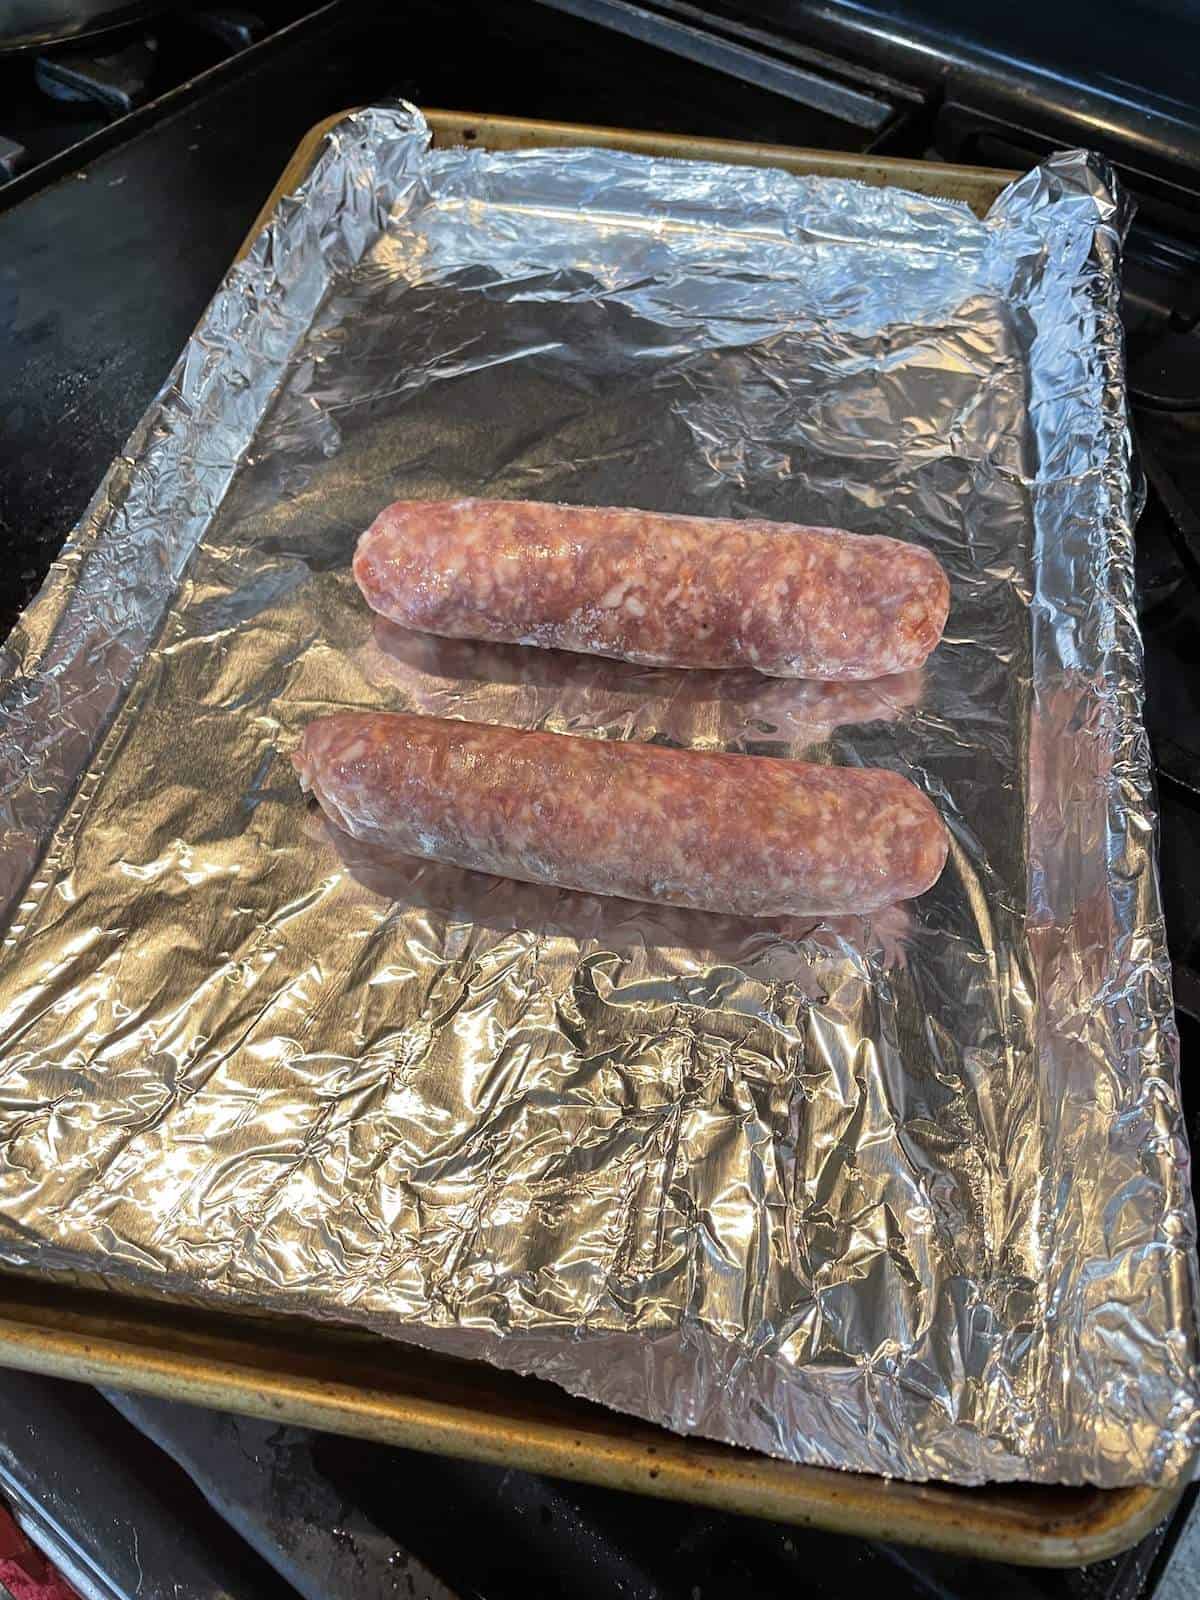 Two uncooked Italian sausage links on a foil lined baking sheet.